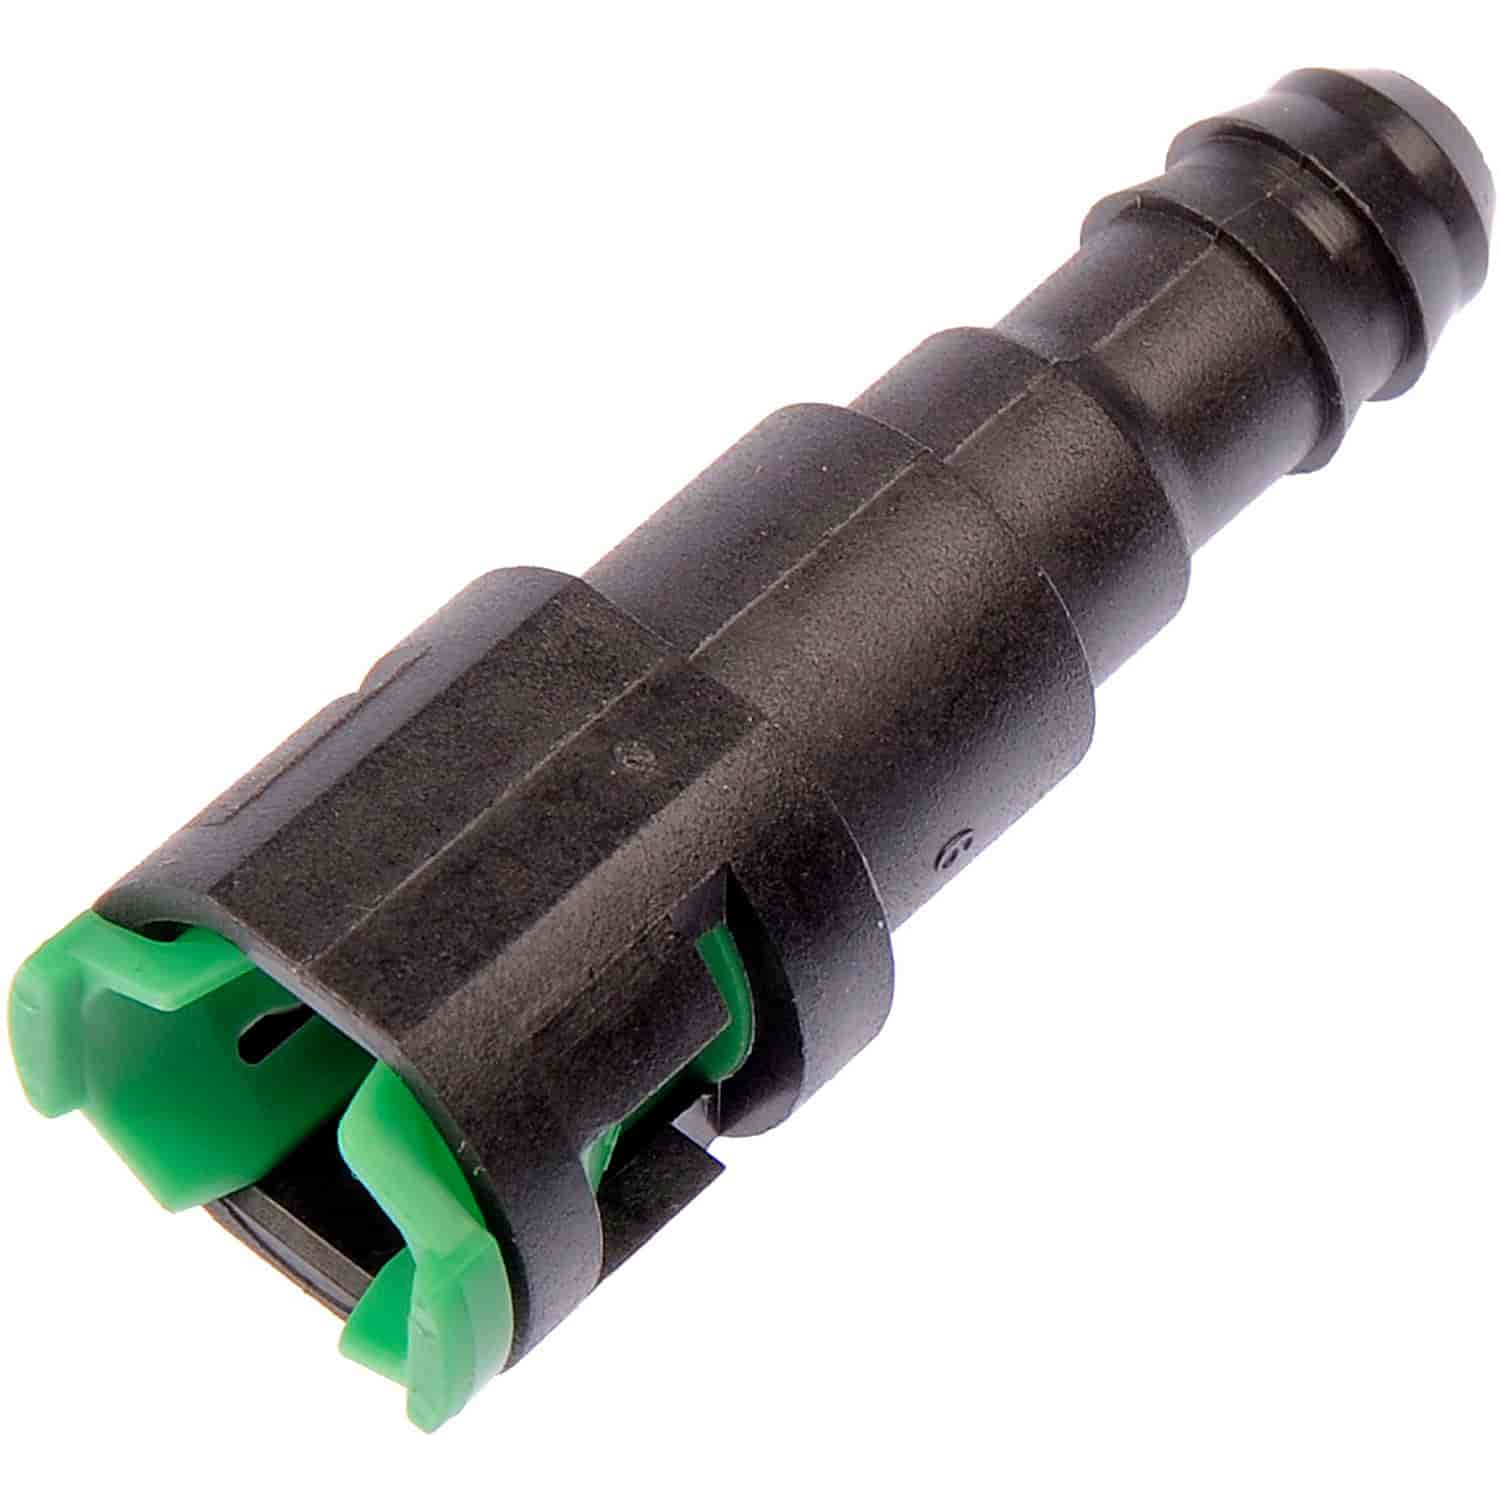 Fuel Line Quick Connectors Straight Adapts 5/16" Steel to 3/8" (8 mm) Nylon Tubing